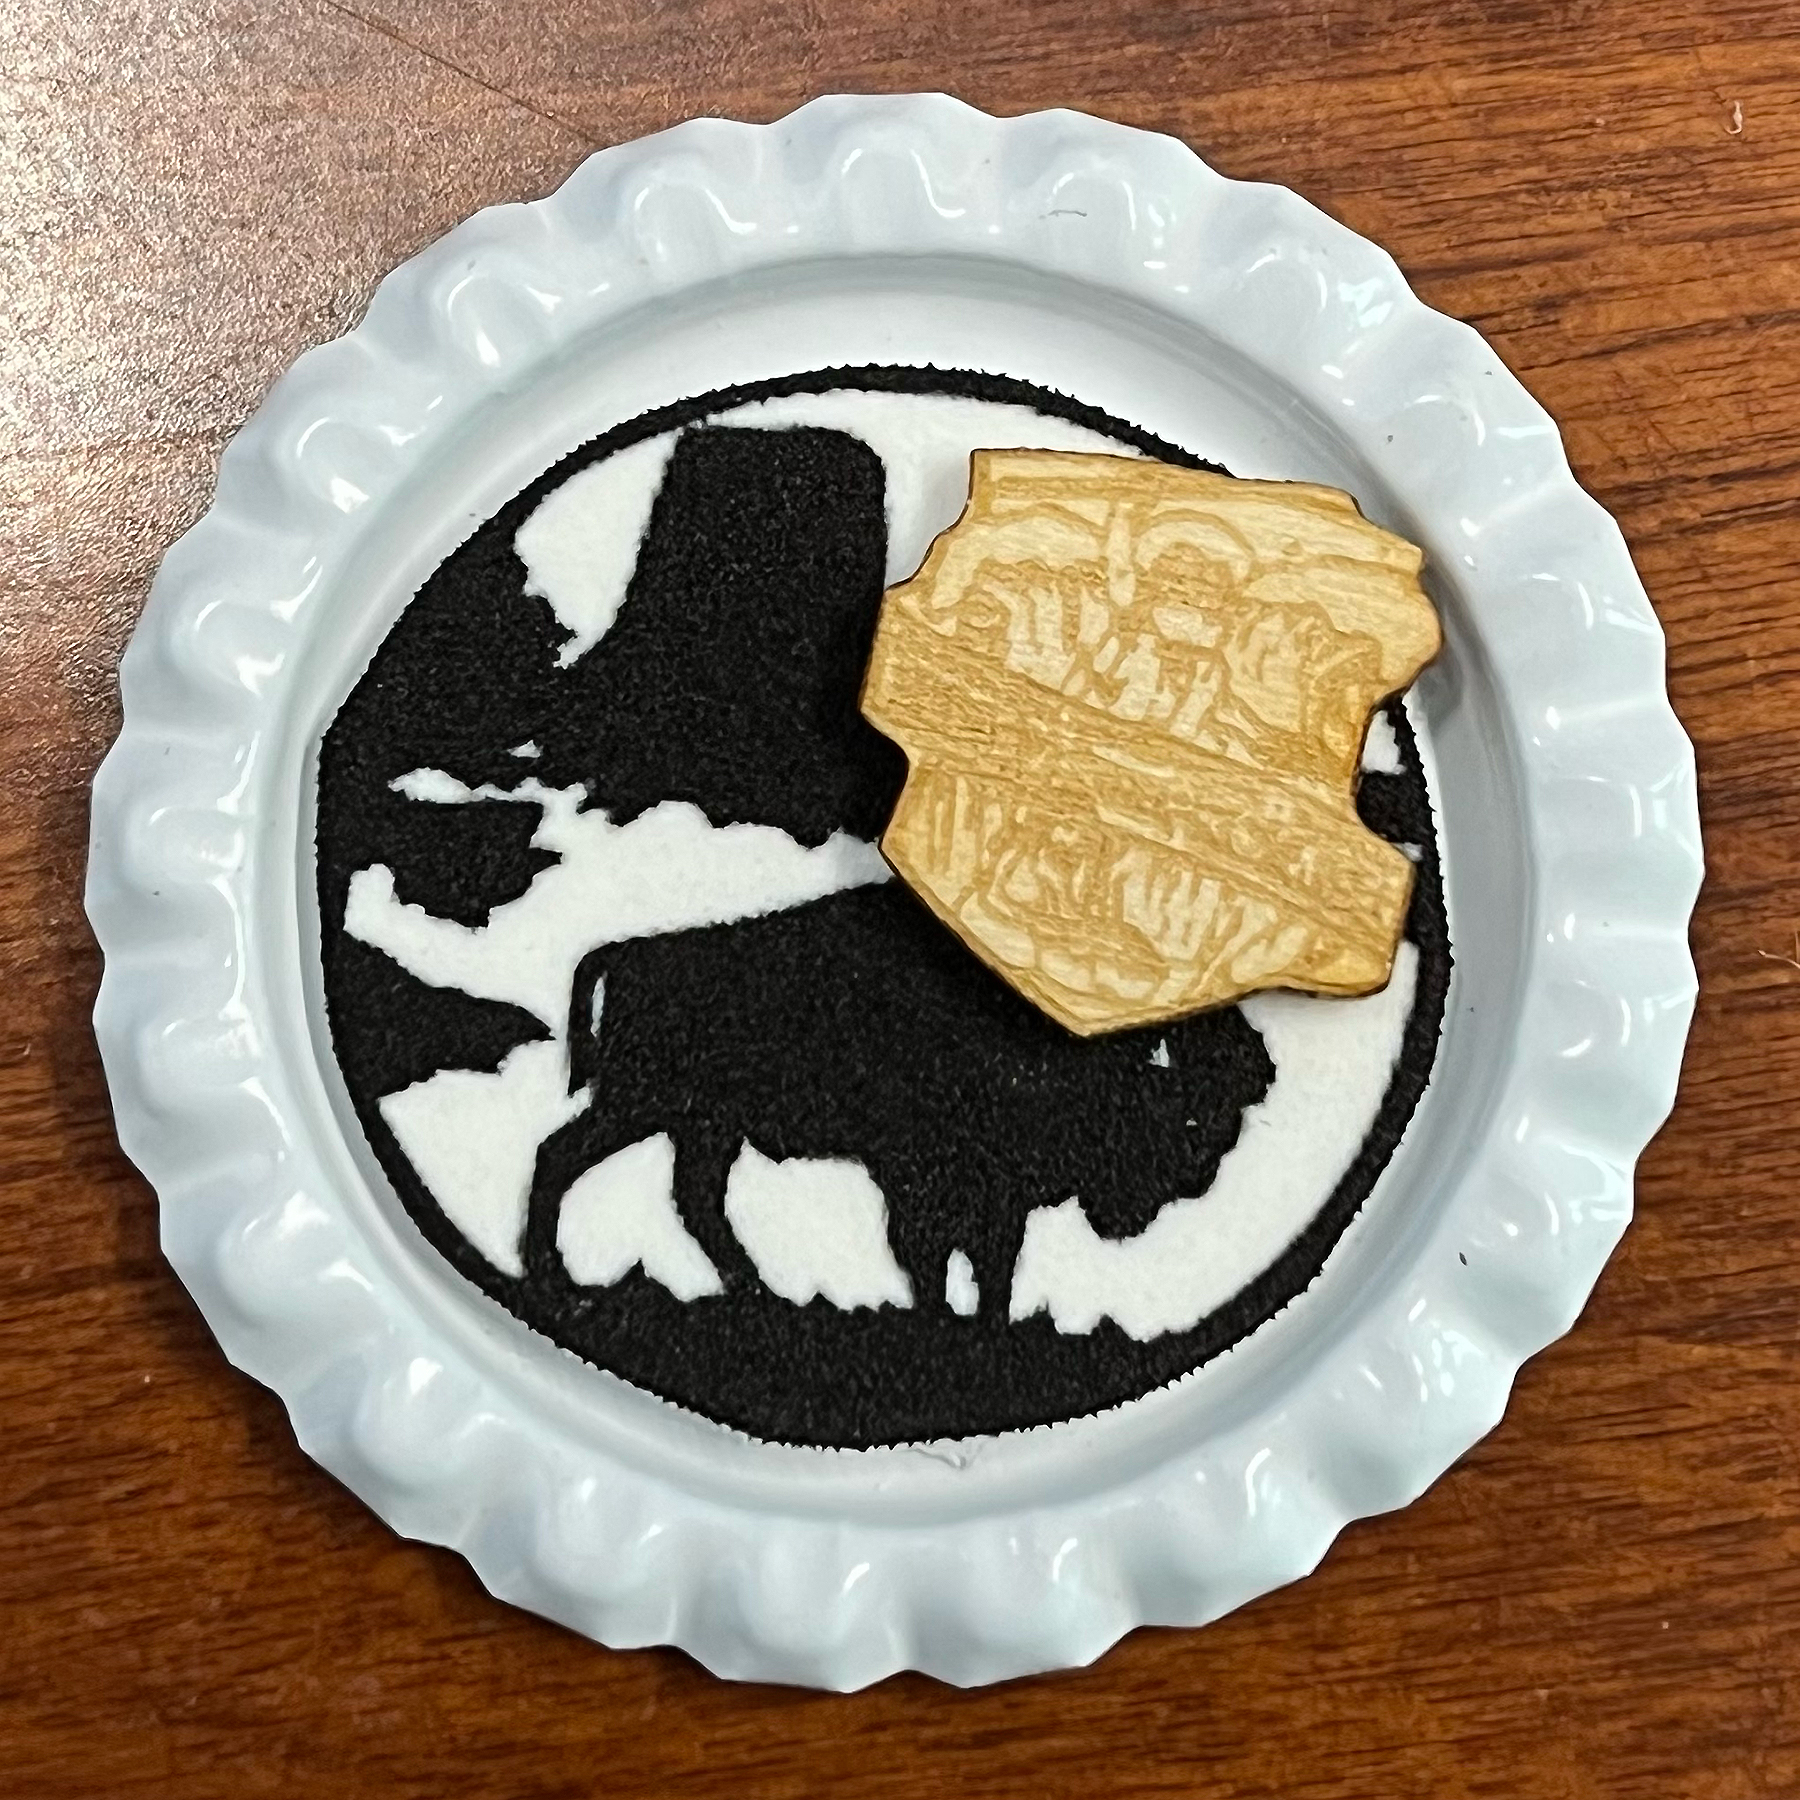 Homemade white pin with gold camporee logo and black bison